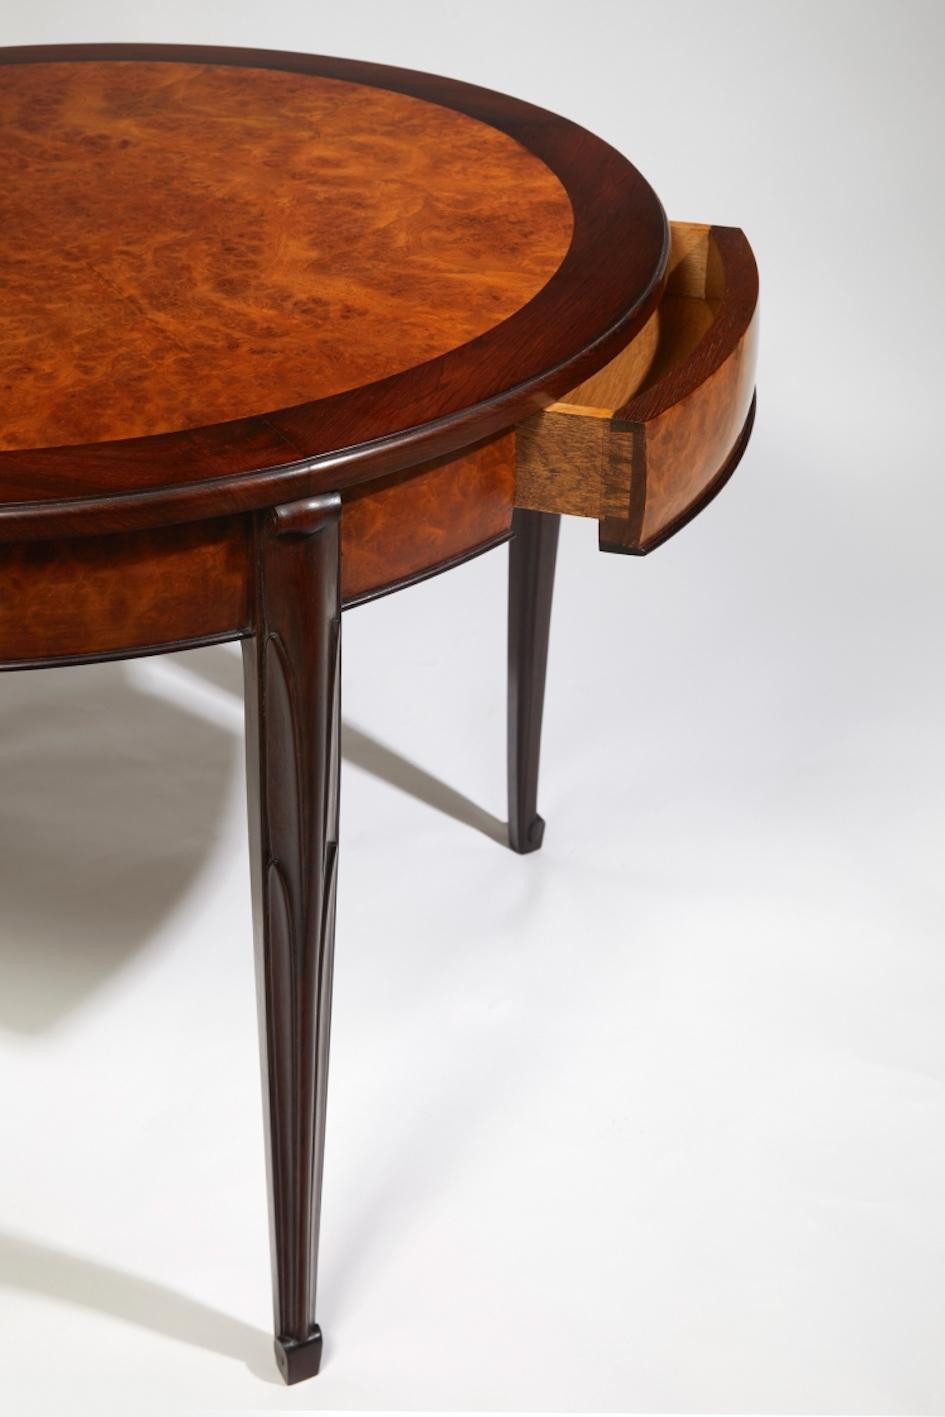 In wood and Thuya circular side table opening with two drawers in a belt, resting on four sculpted legs with stylized foliage and sticks motifs.


Origin:

Collection Edouard Mignot, Marne, France; Collection particulière en Auvergne,